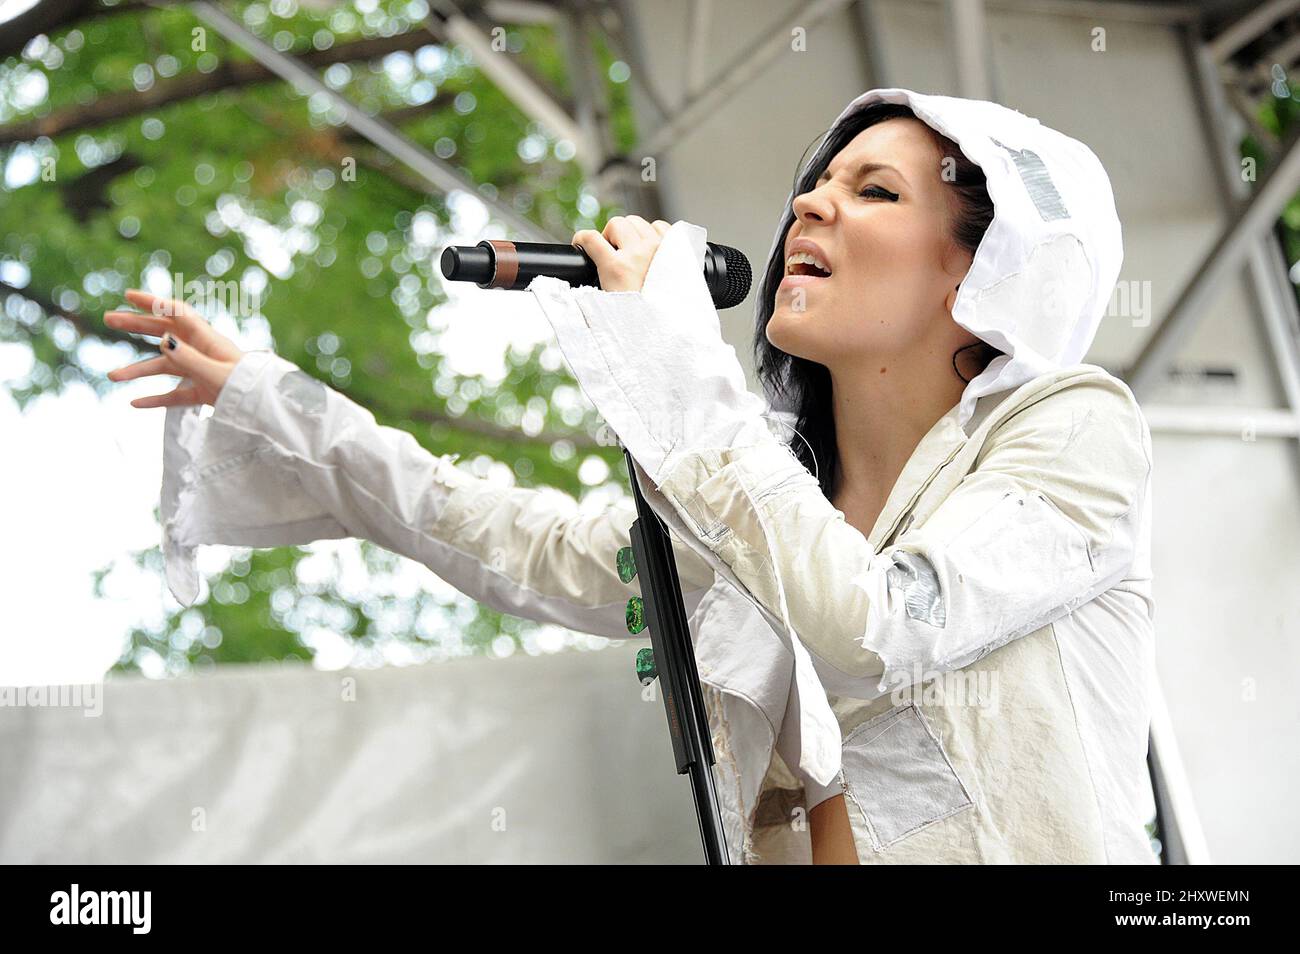 Skylar Grey during the 20th Anniversary Lollapalooza Music Festival that is taking place at Grant Park, Chicago Stock Photo